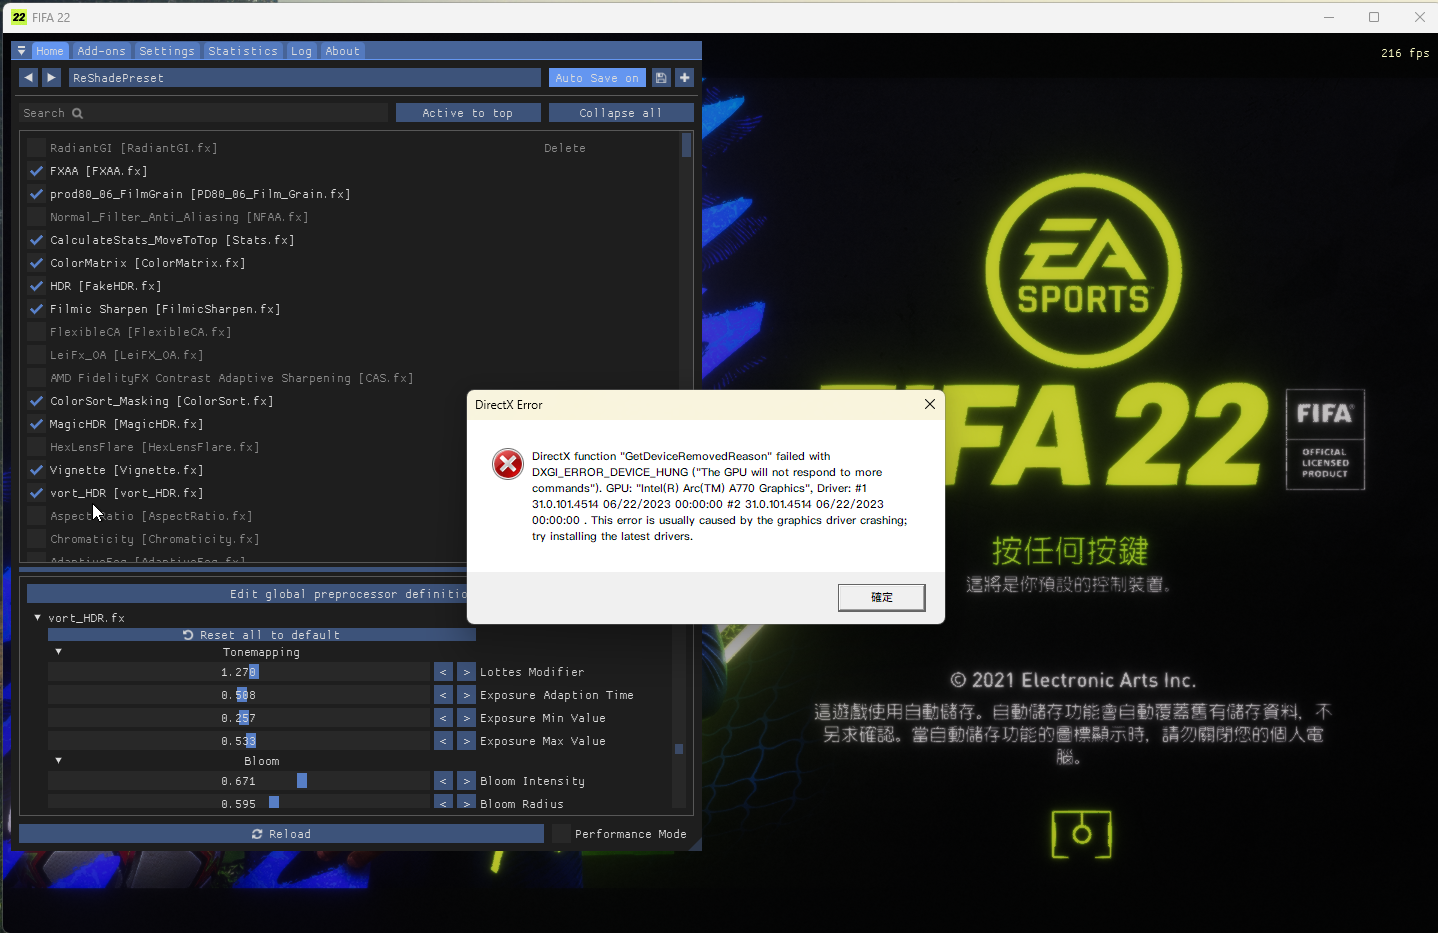 FIFA 22 Web App Troubleshooting Guide for the Most Common Issues